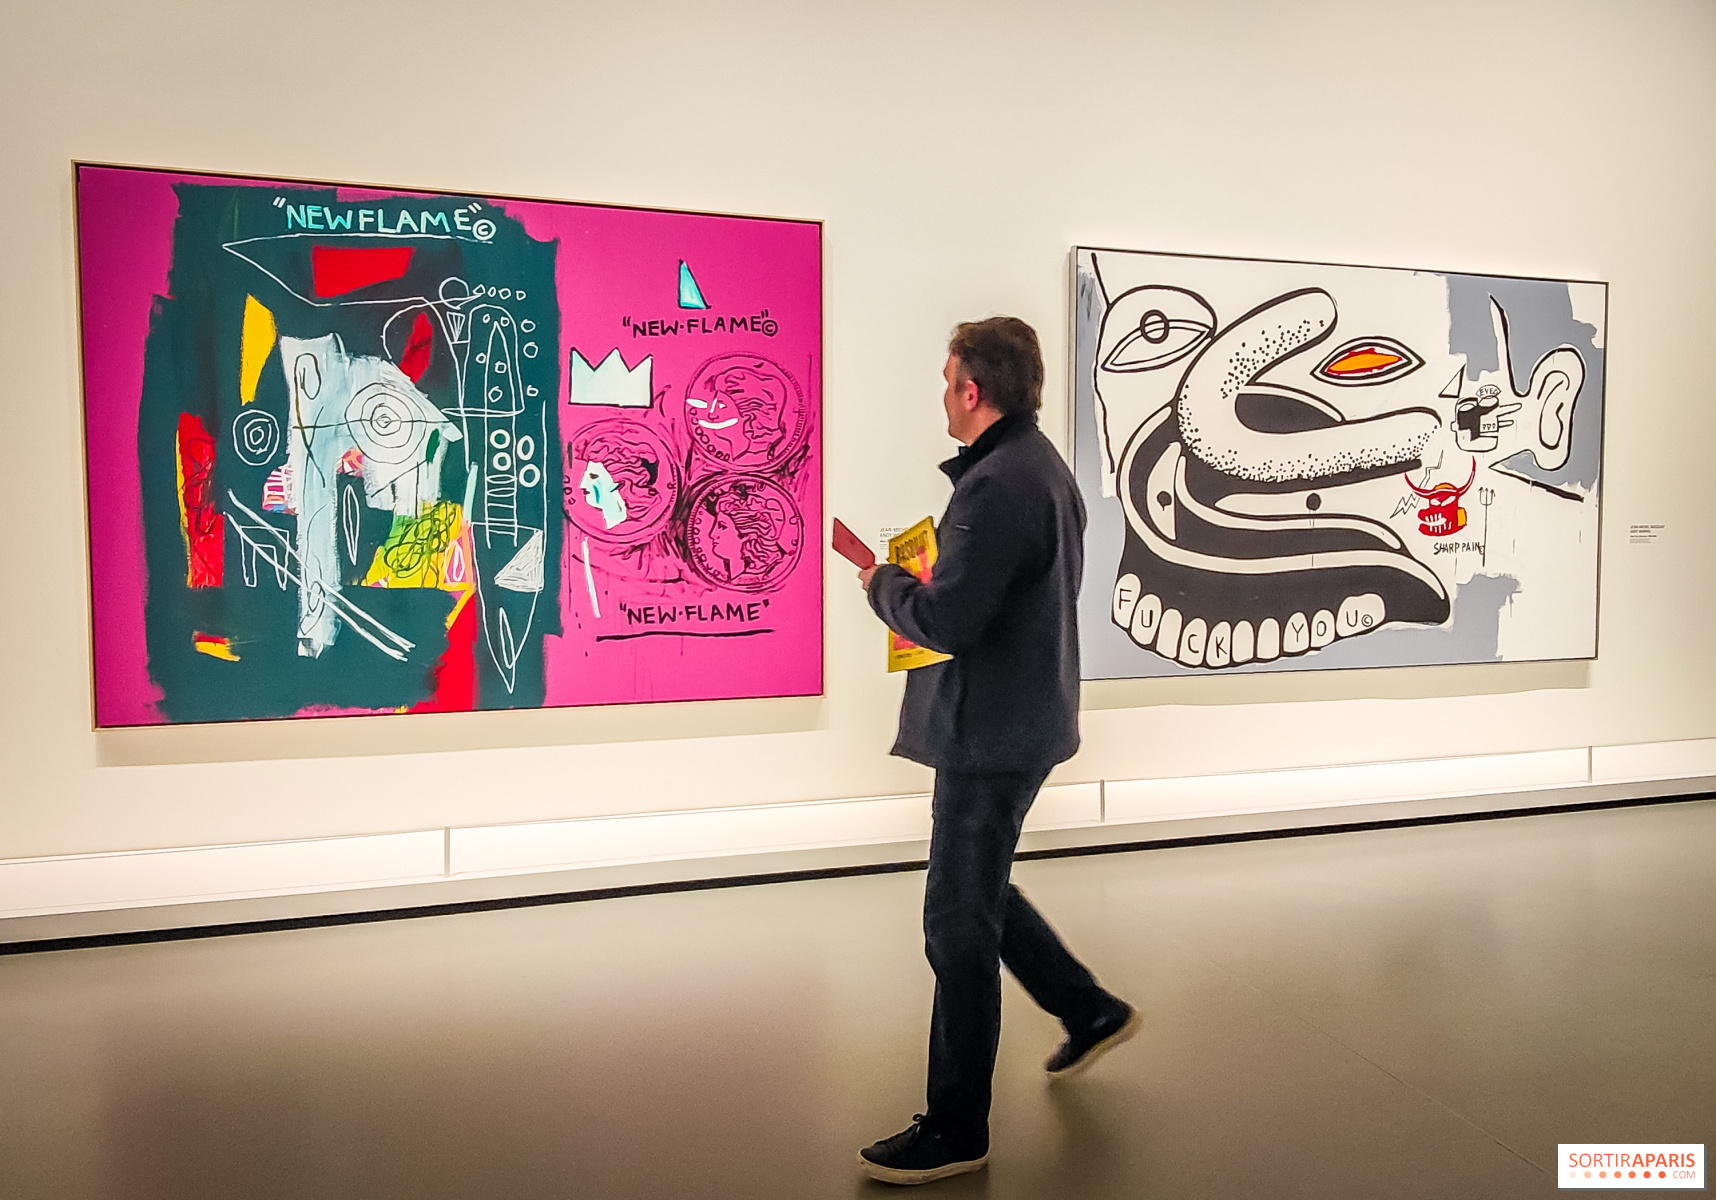 New 'Basquiat x Warhol' Exhibition Chronicles One of the Greatest